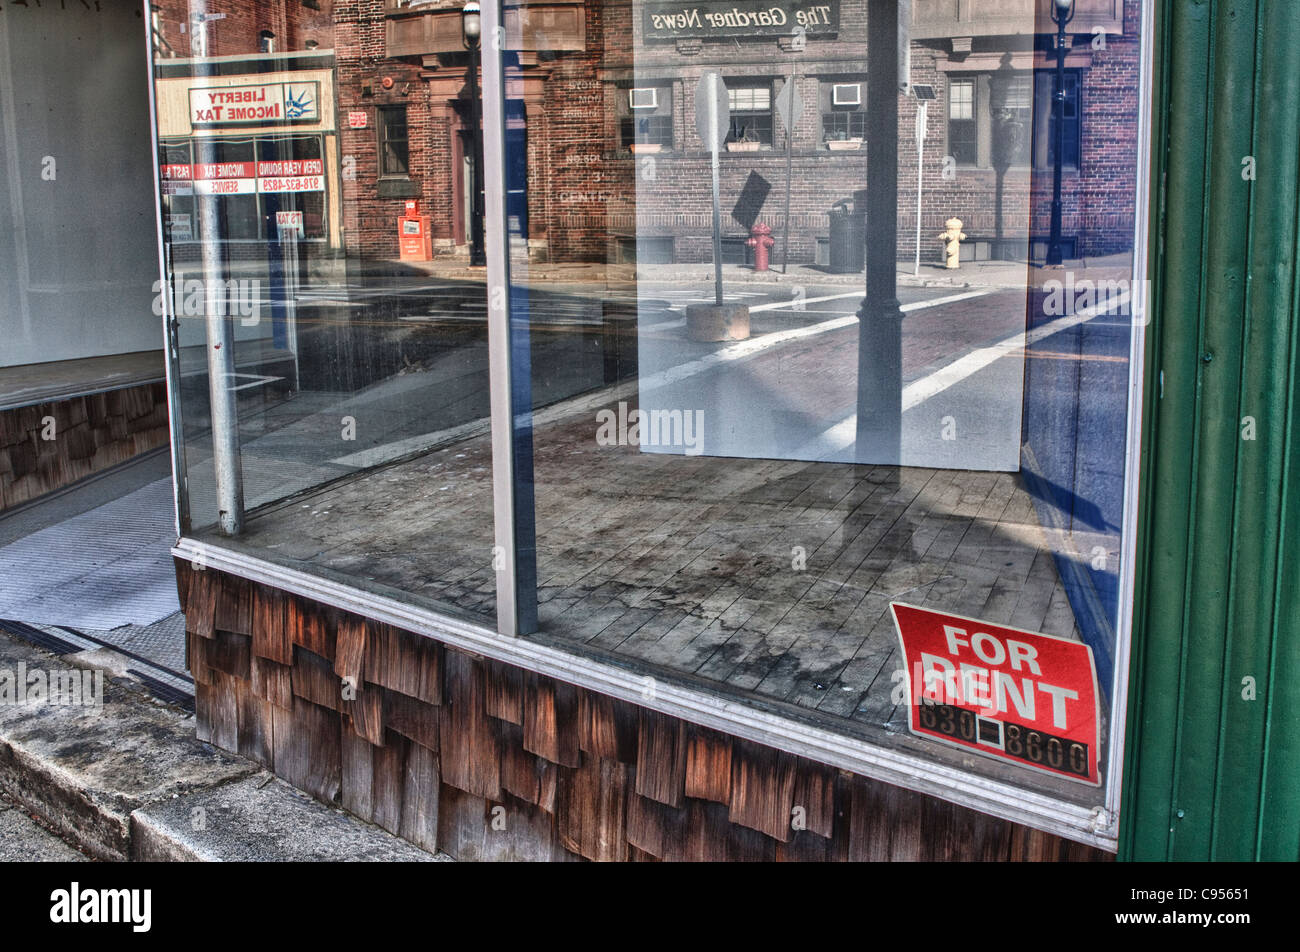 For Rent sign in an empty downtown retail store Stock Photo